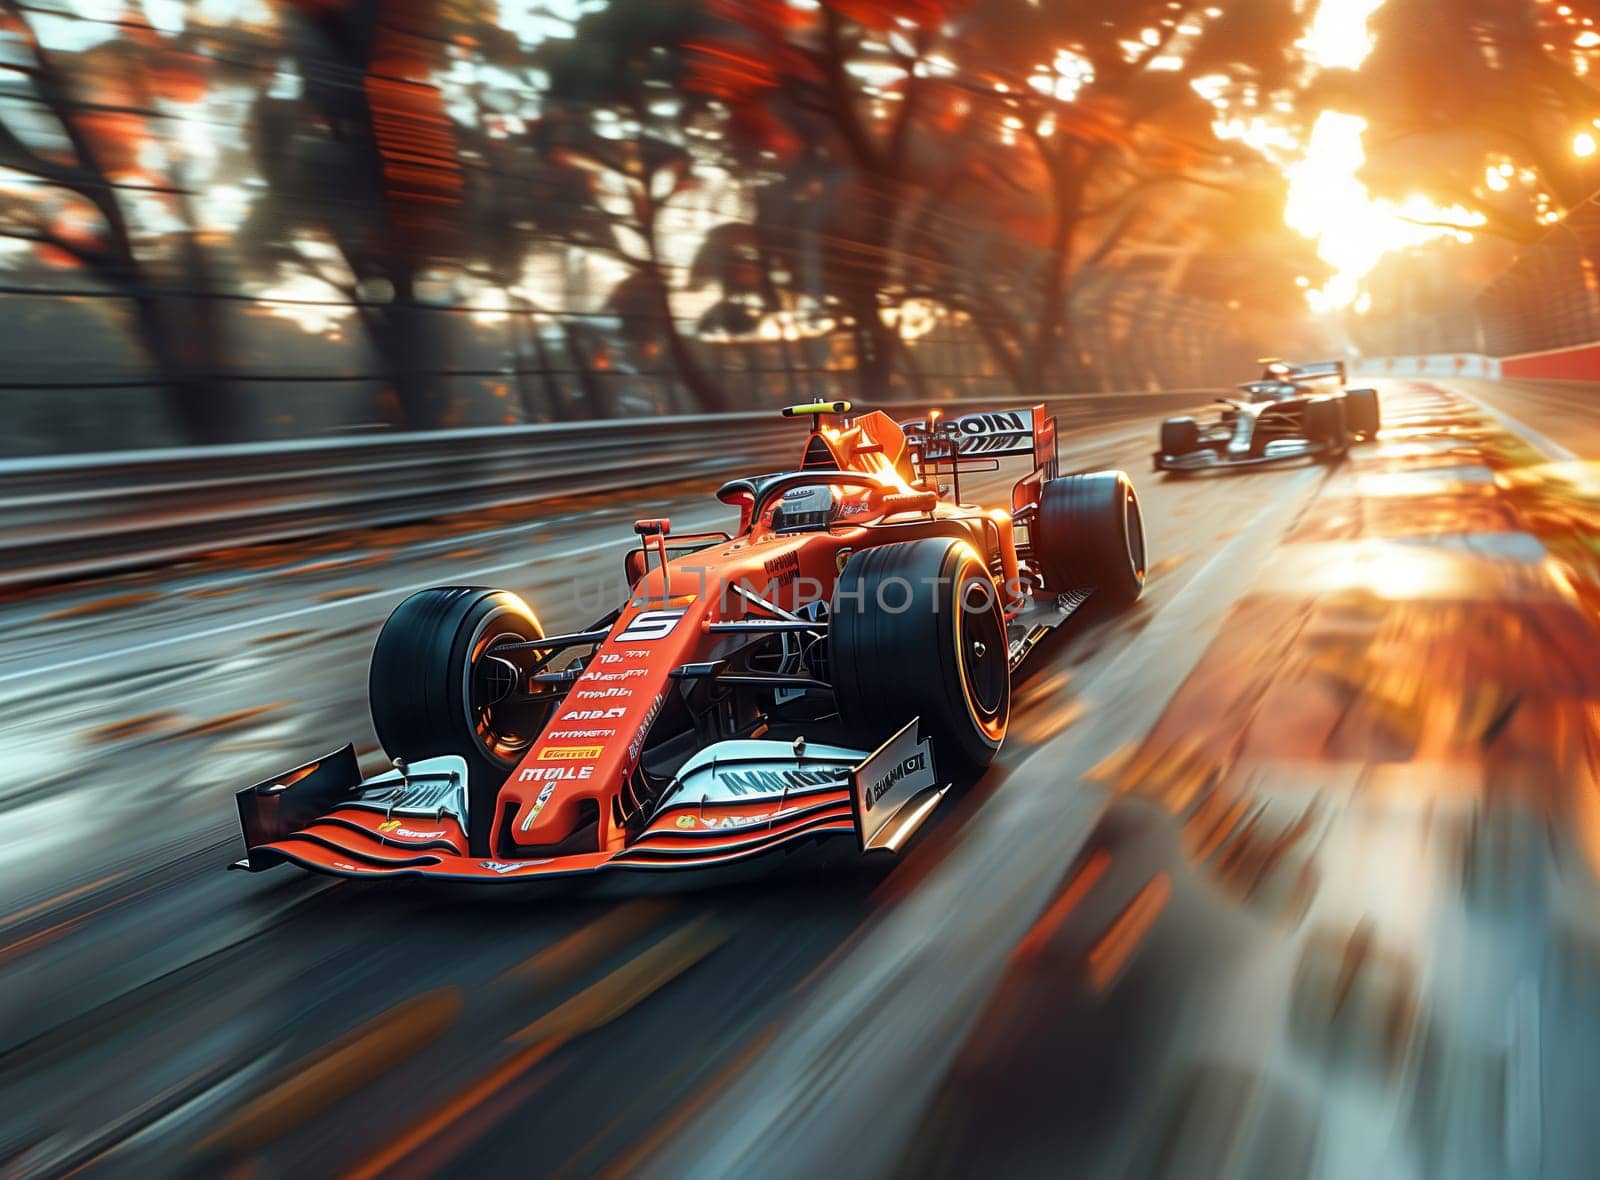 Racing car speeds on asphalt track at sunset with glowing automotive lighting by richwolf